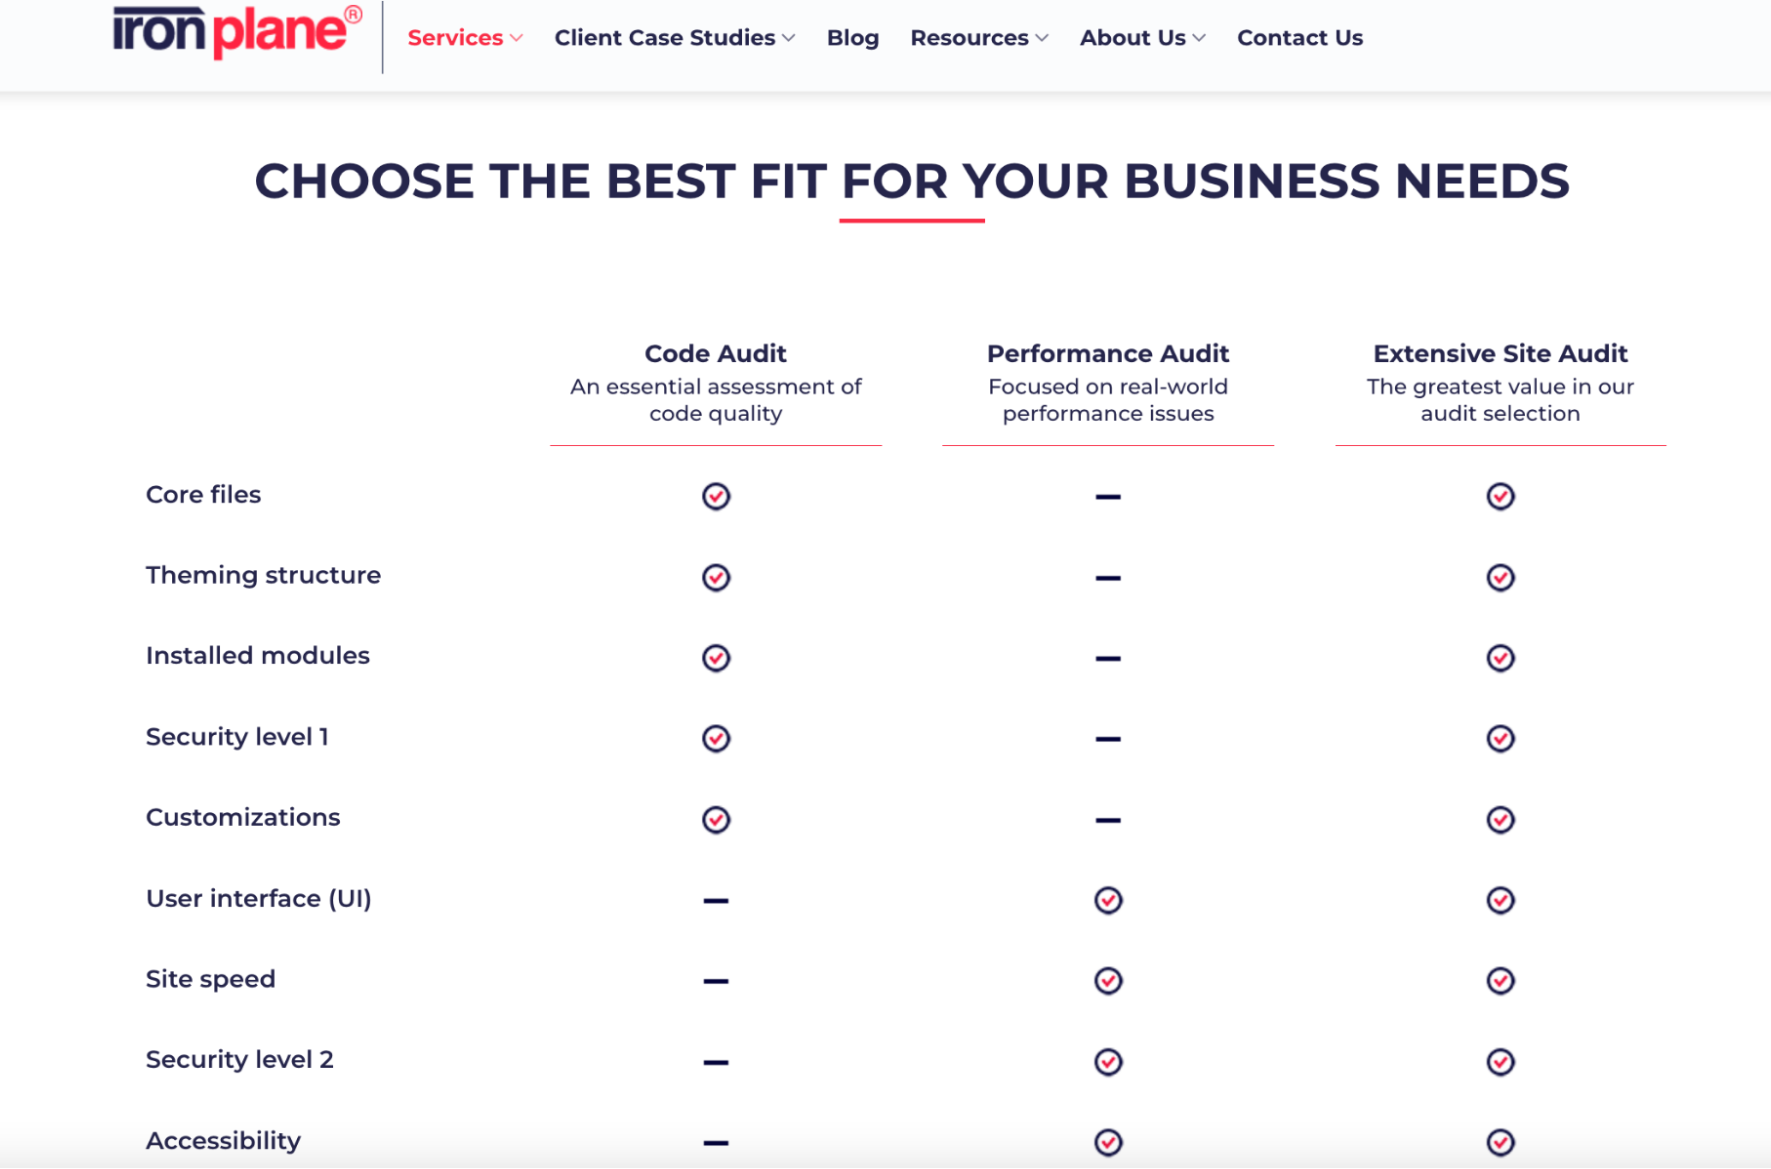 IronPlane Services: Choose the best fit for your business needs